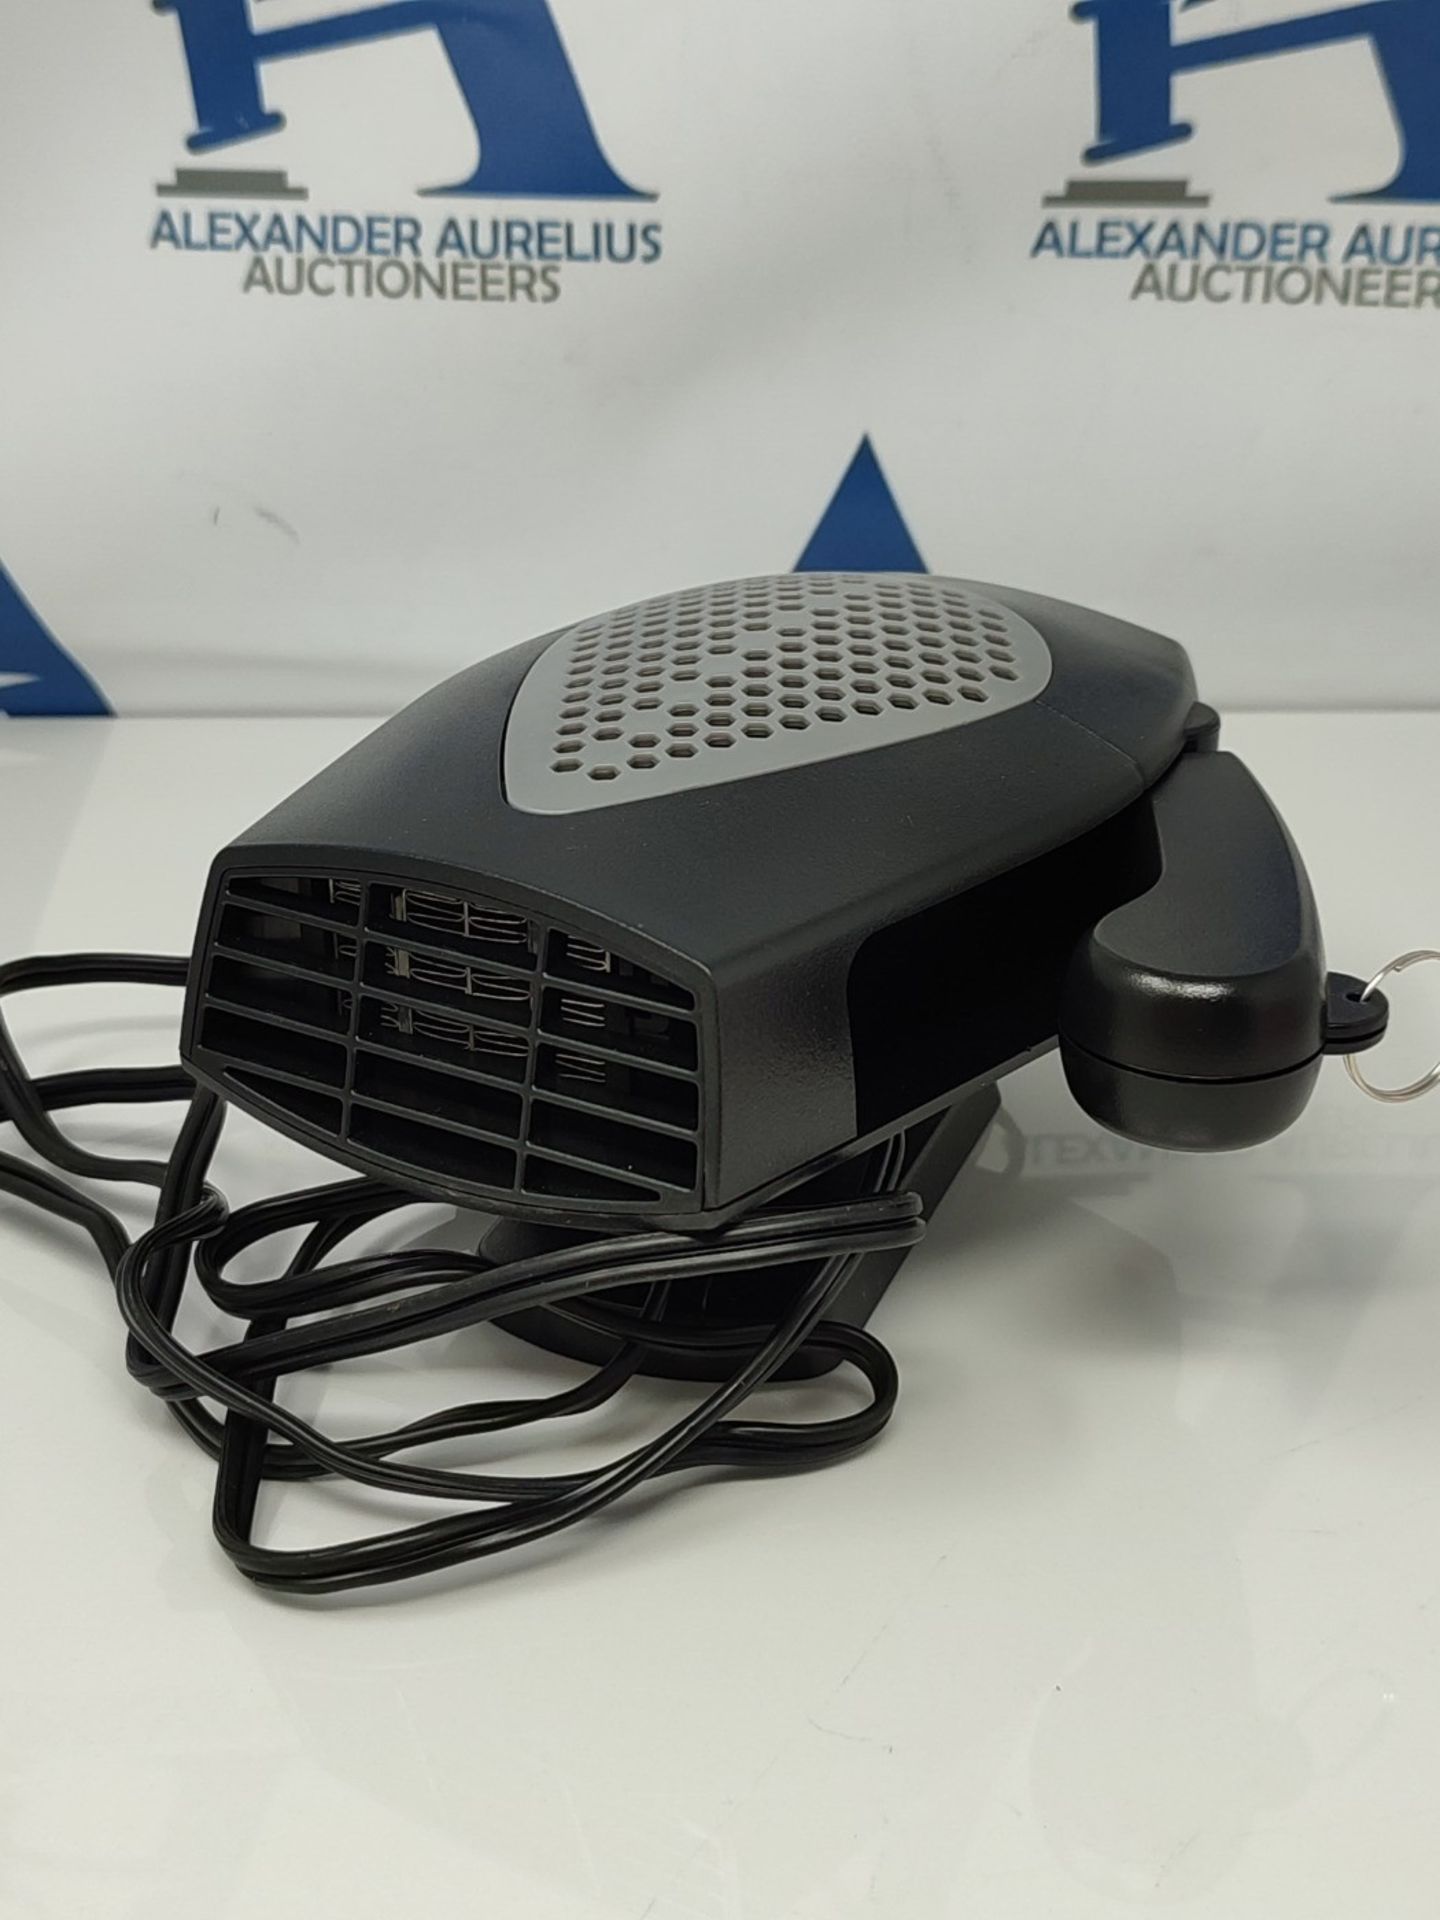 REVERSE Car Heater, 12V 150W Portable Car Heater with Heating and Cooling 2 in 1 Modes